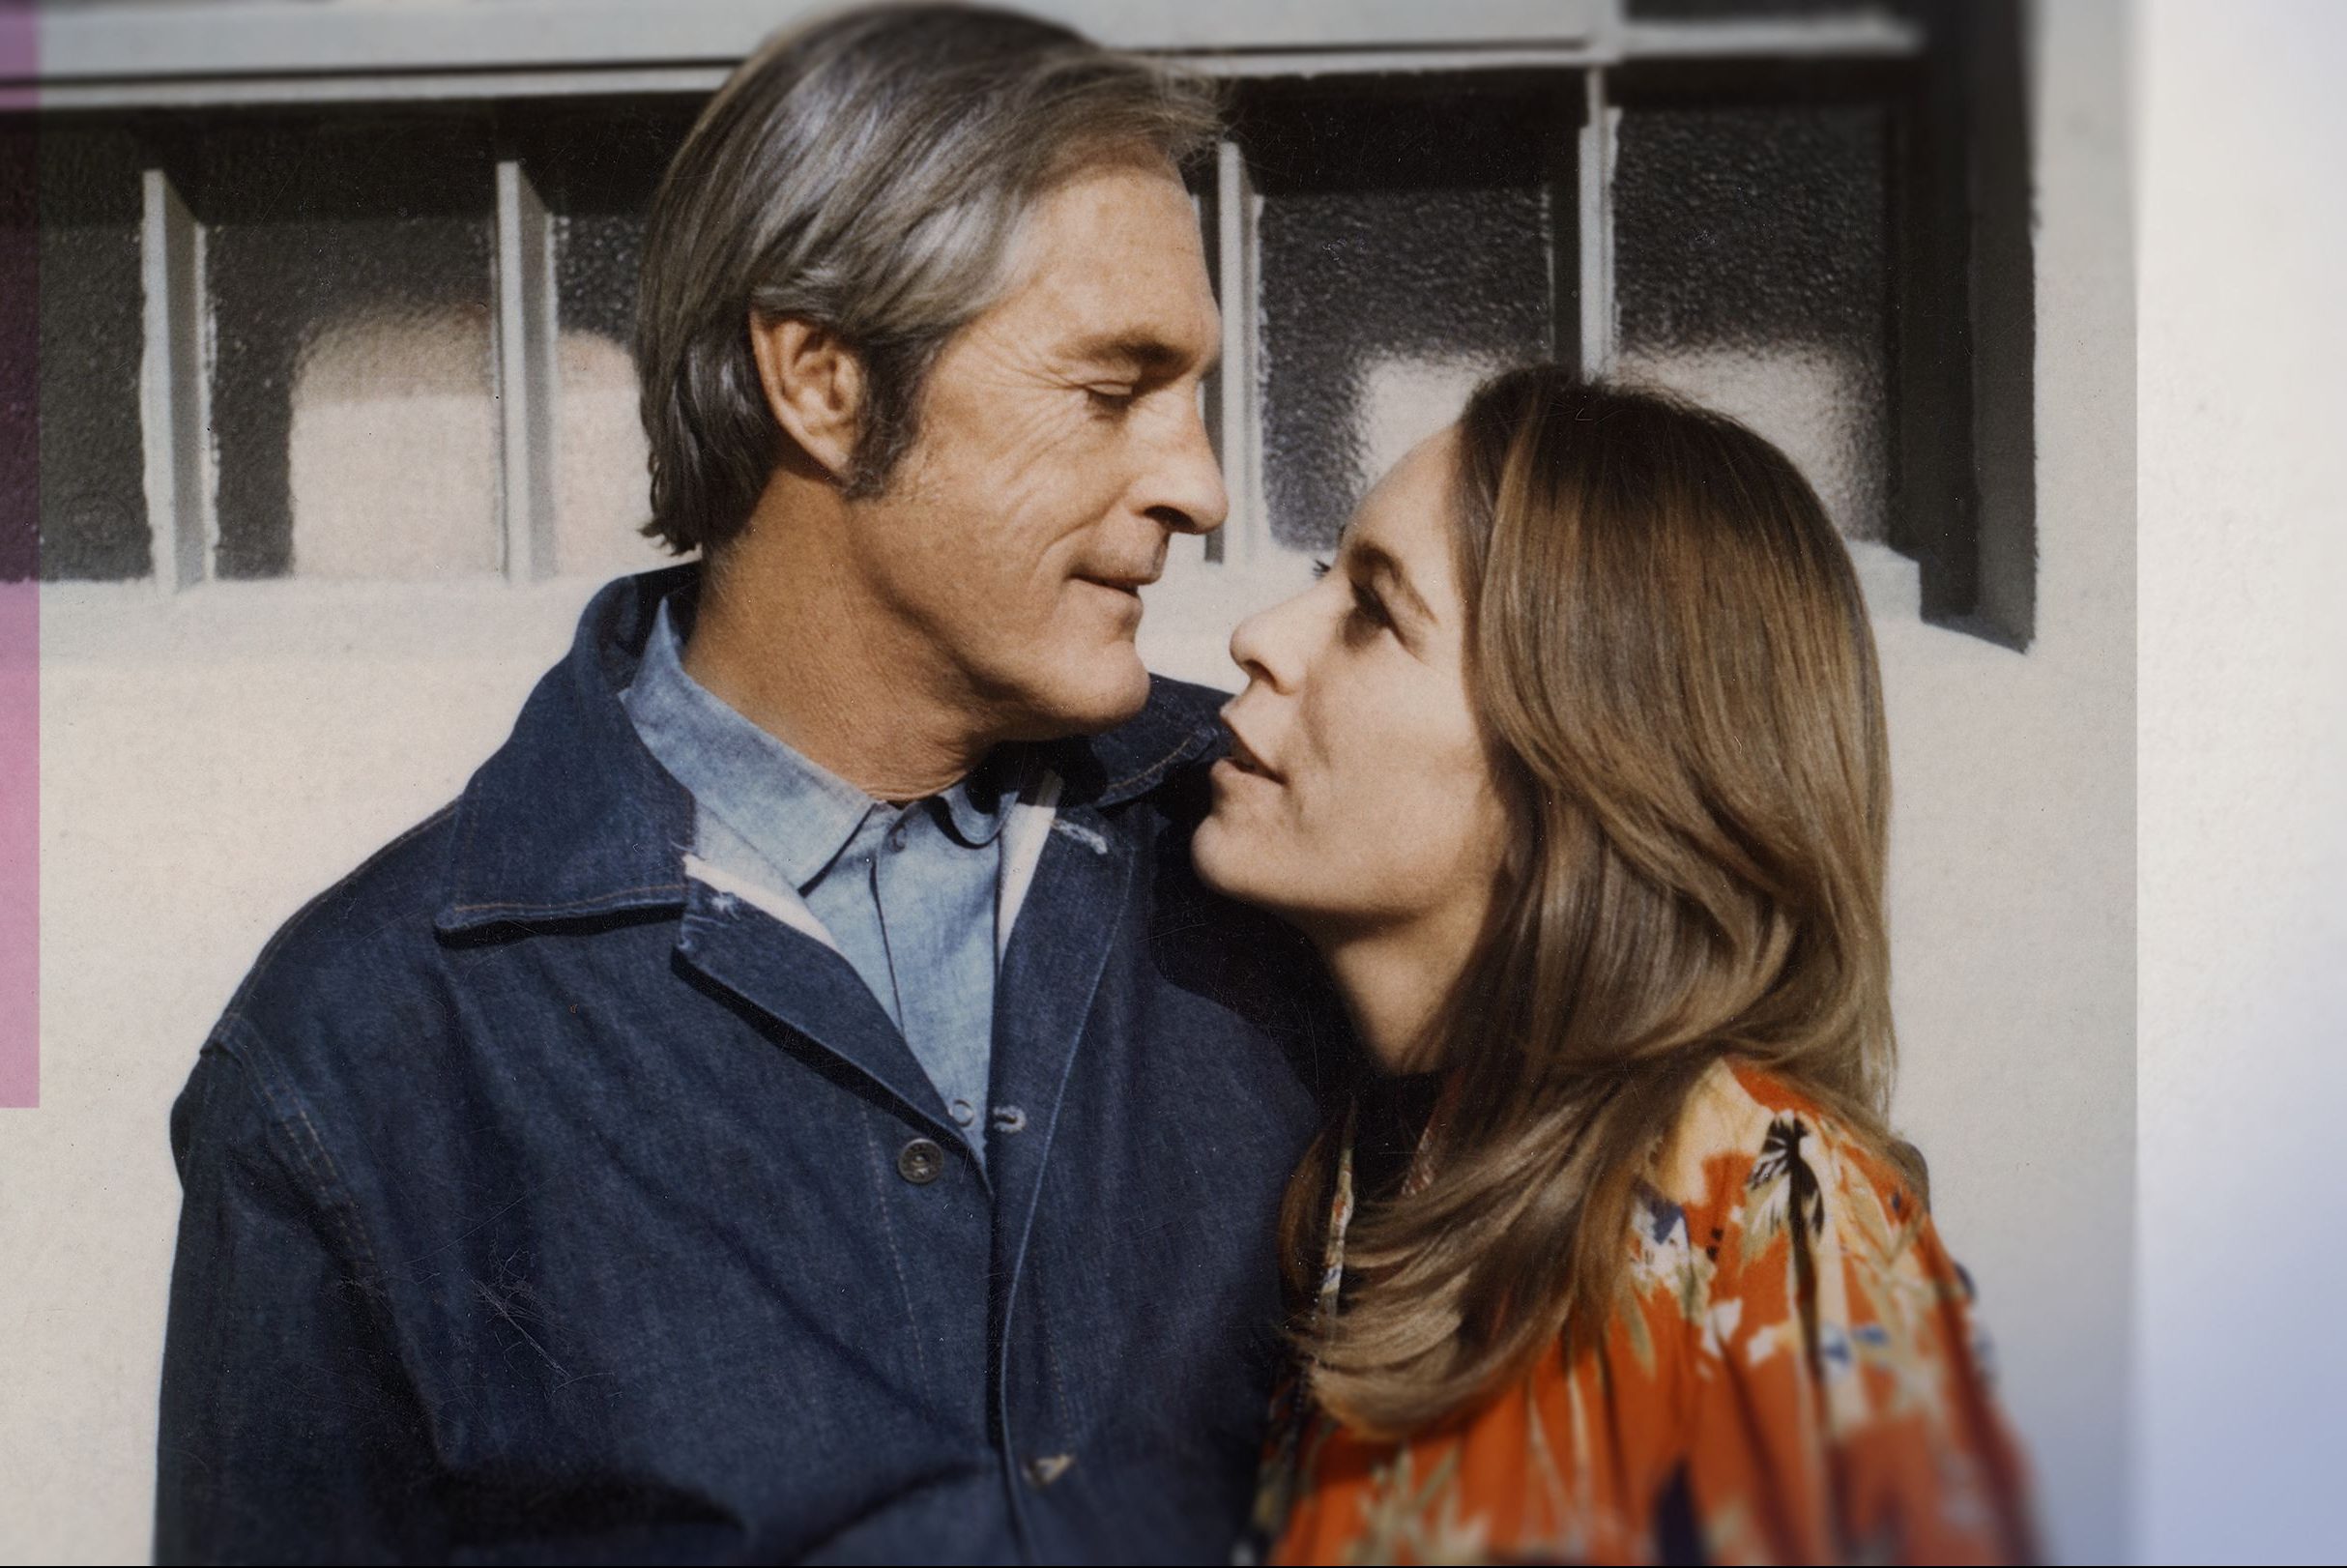 Timothy Leary and Joanna Harcourt-Smith